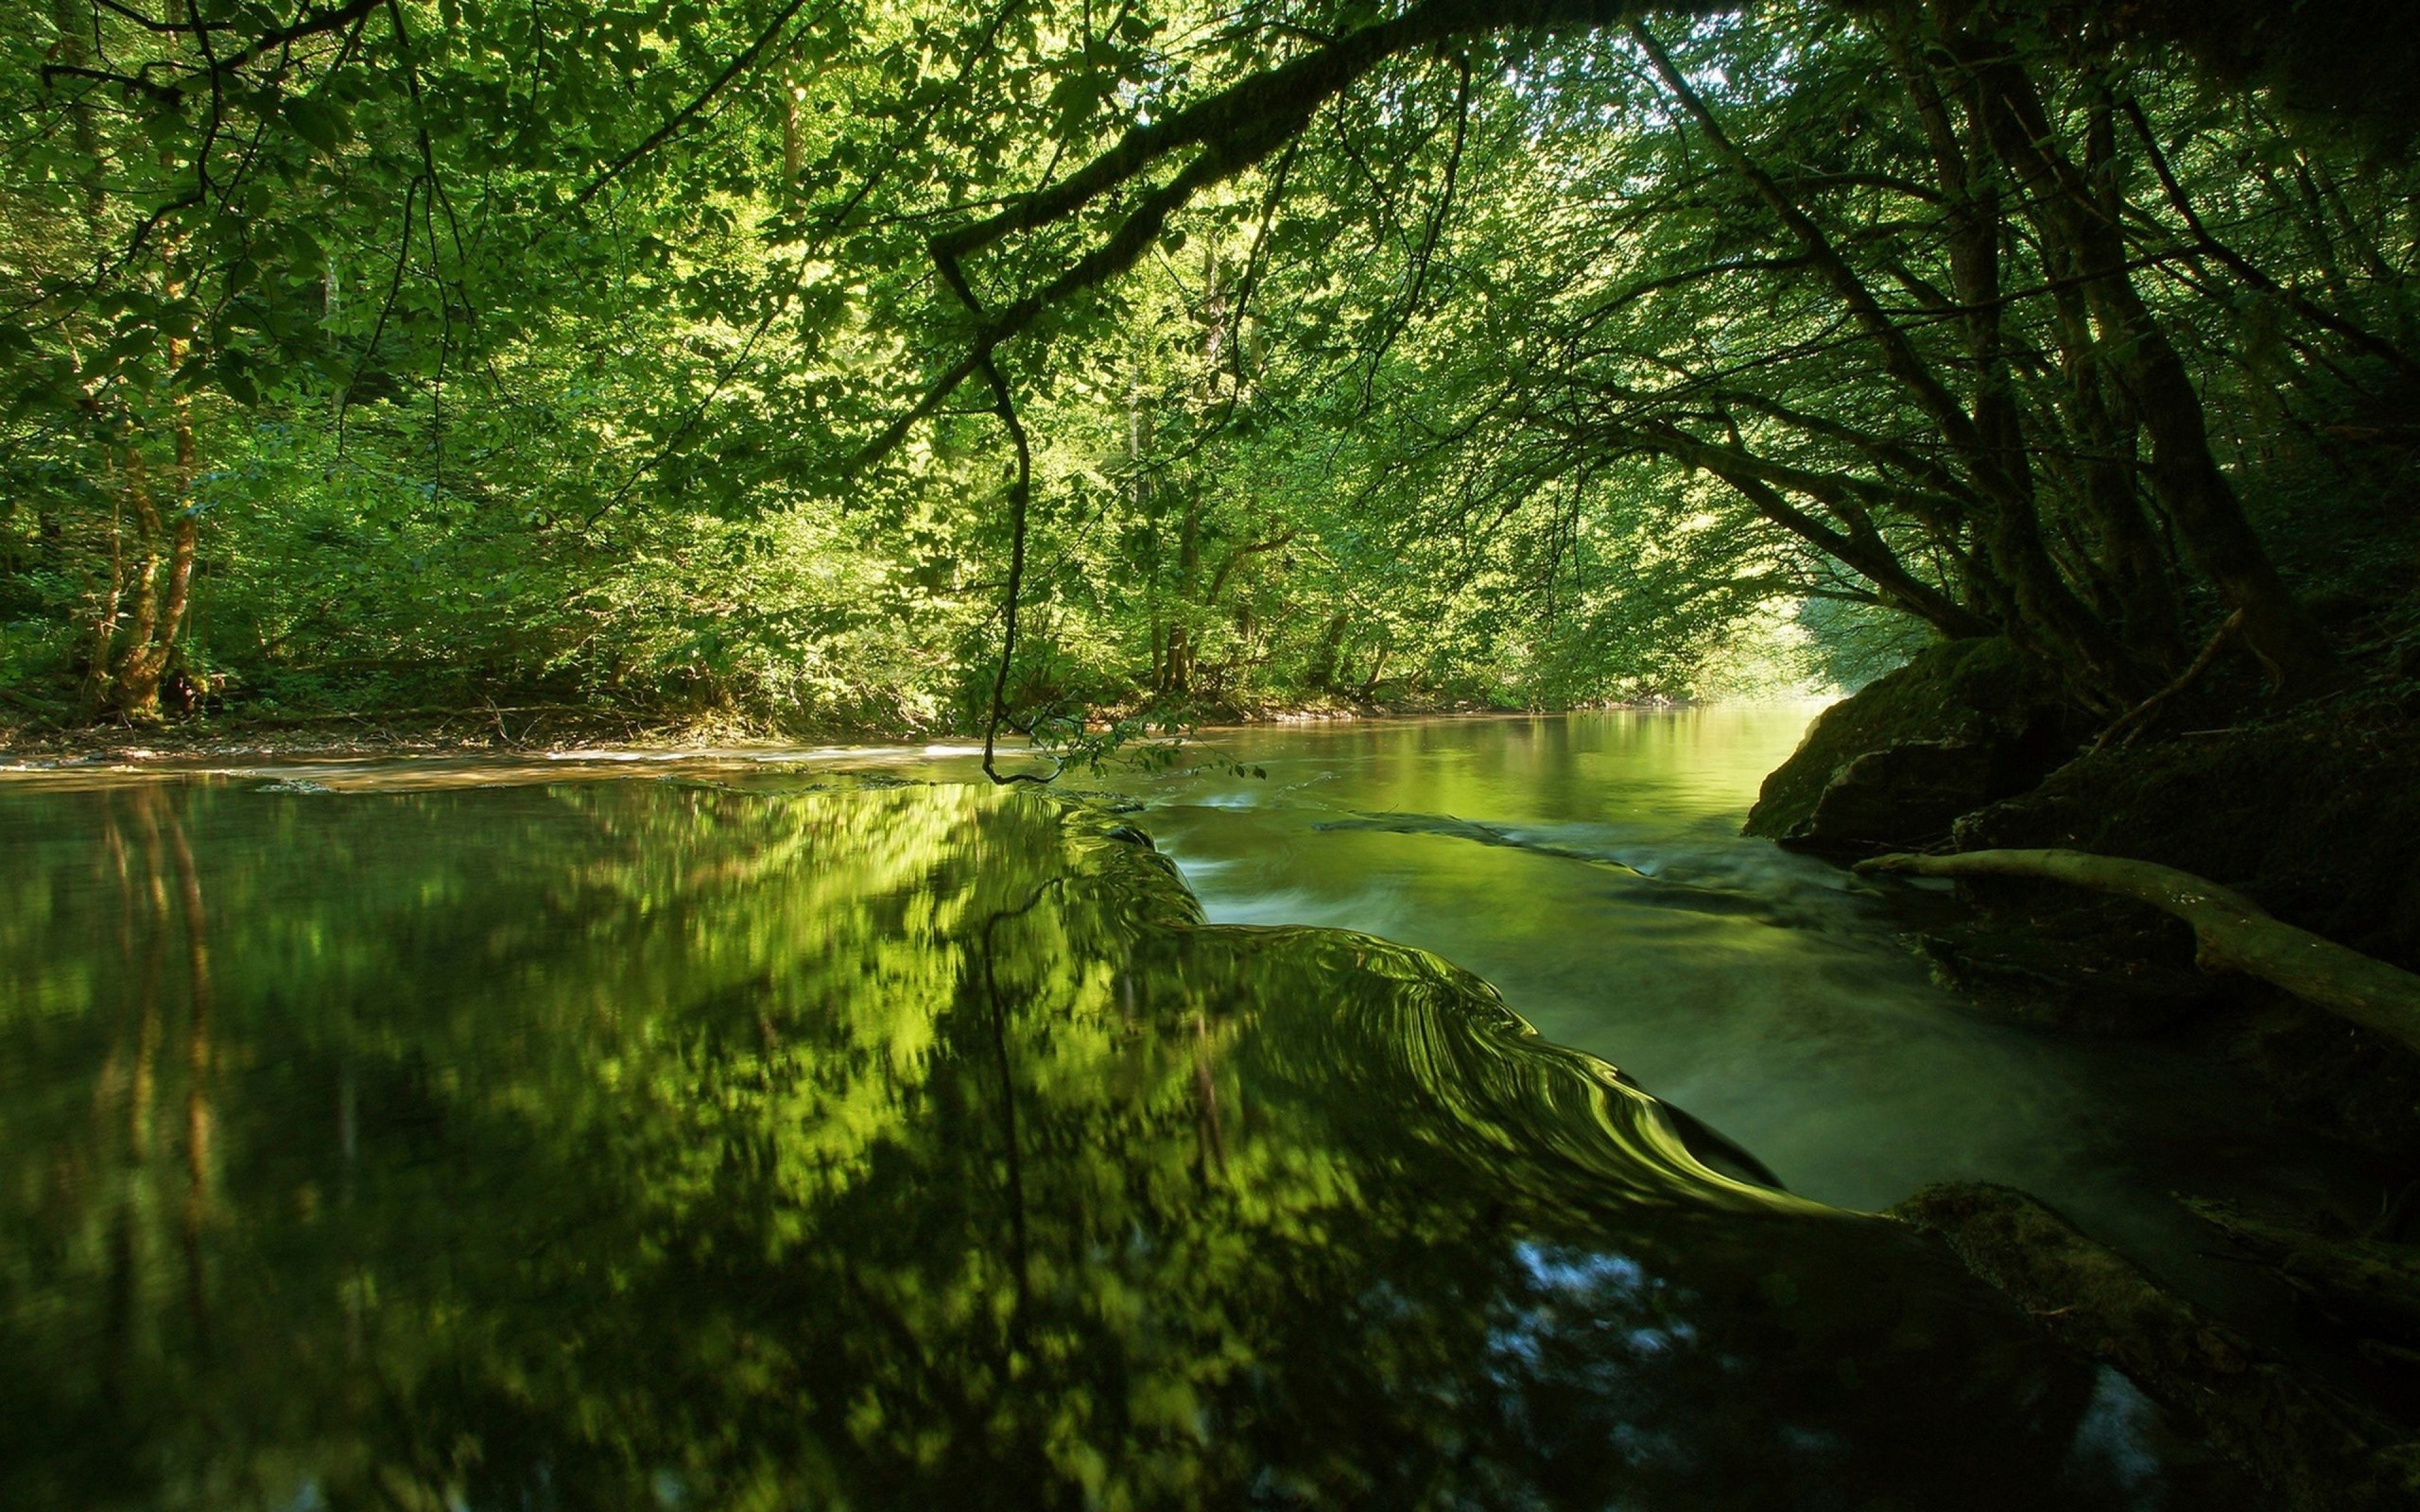 A river in a green forest